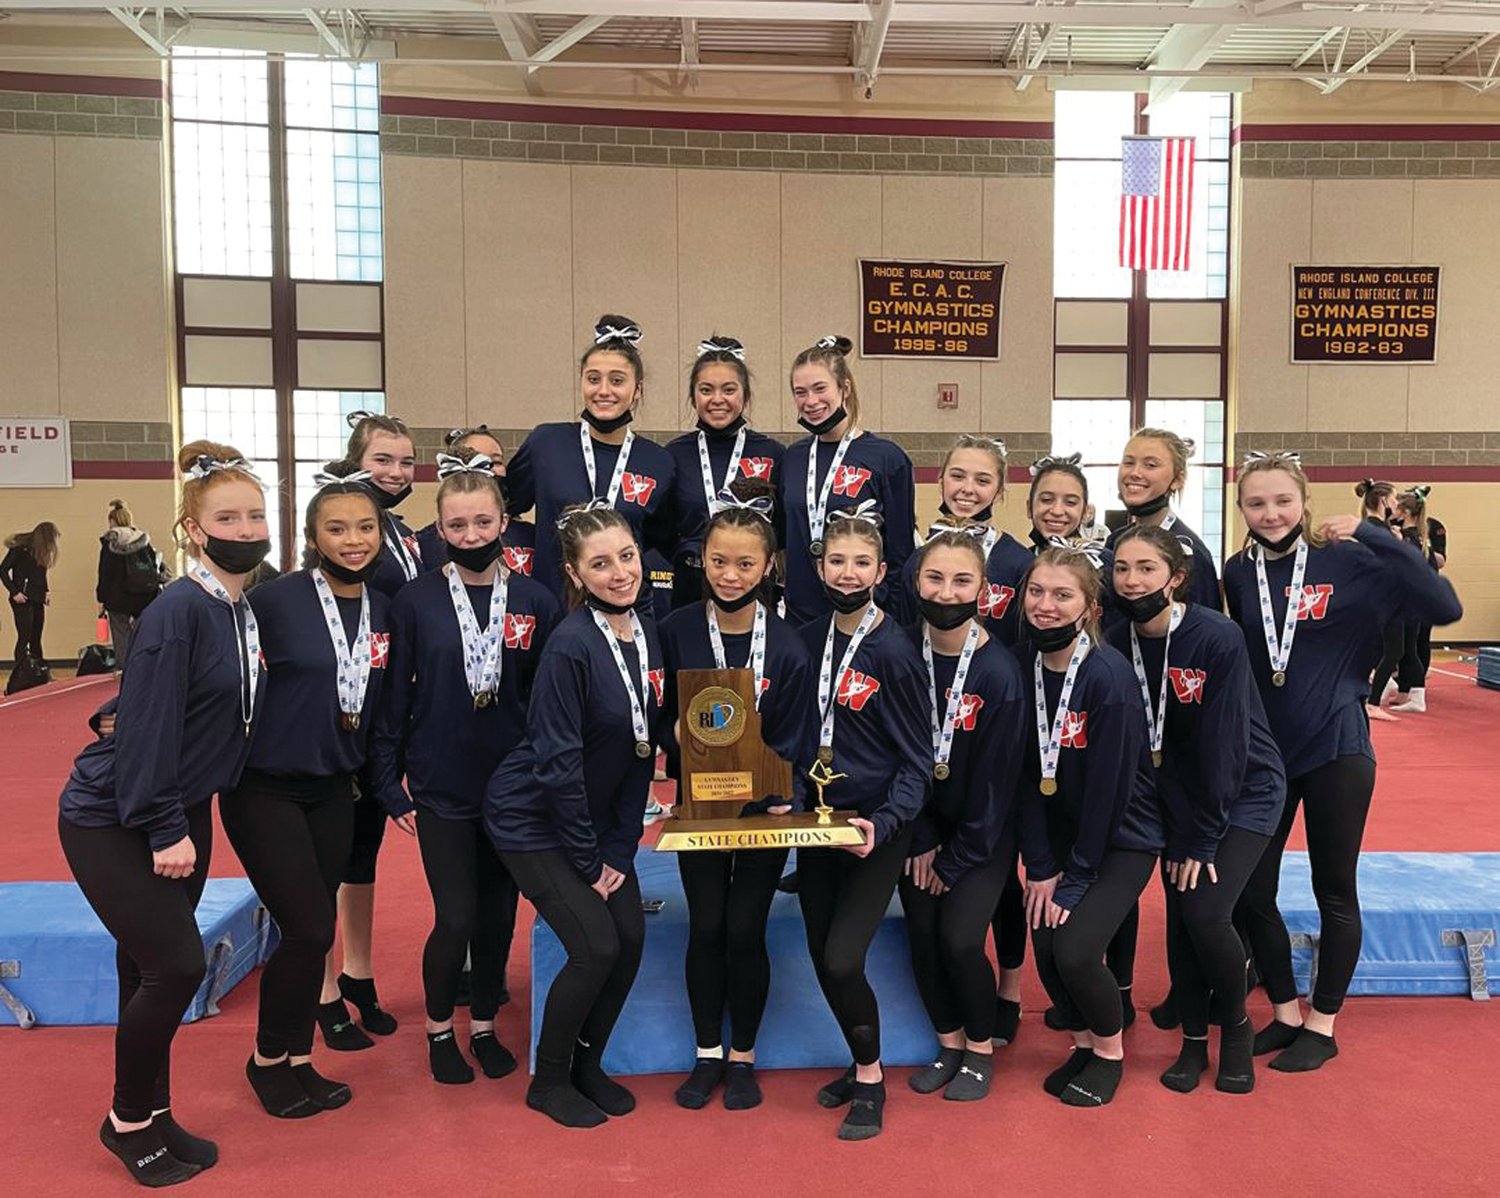 STATE CHAMPS: The Warwick gymnastics co-op after winning the Division I title last Sunday.